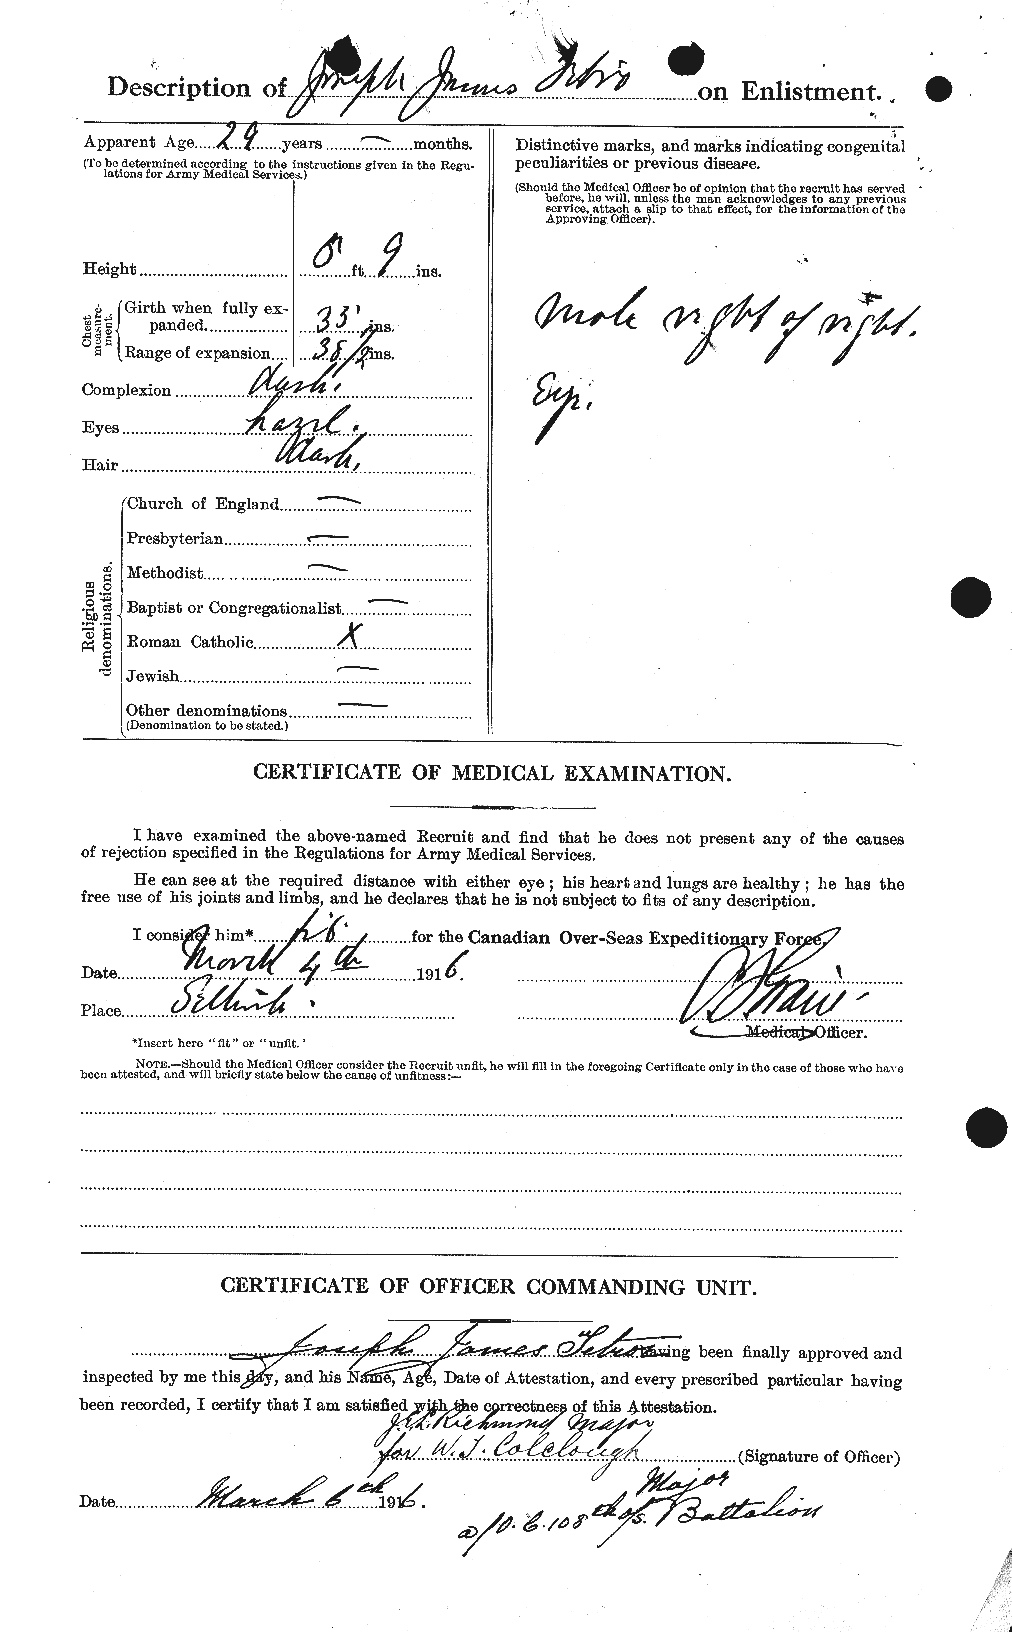 Personnel Records of the First World War - CEF 631273b